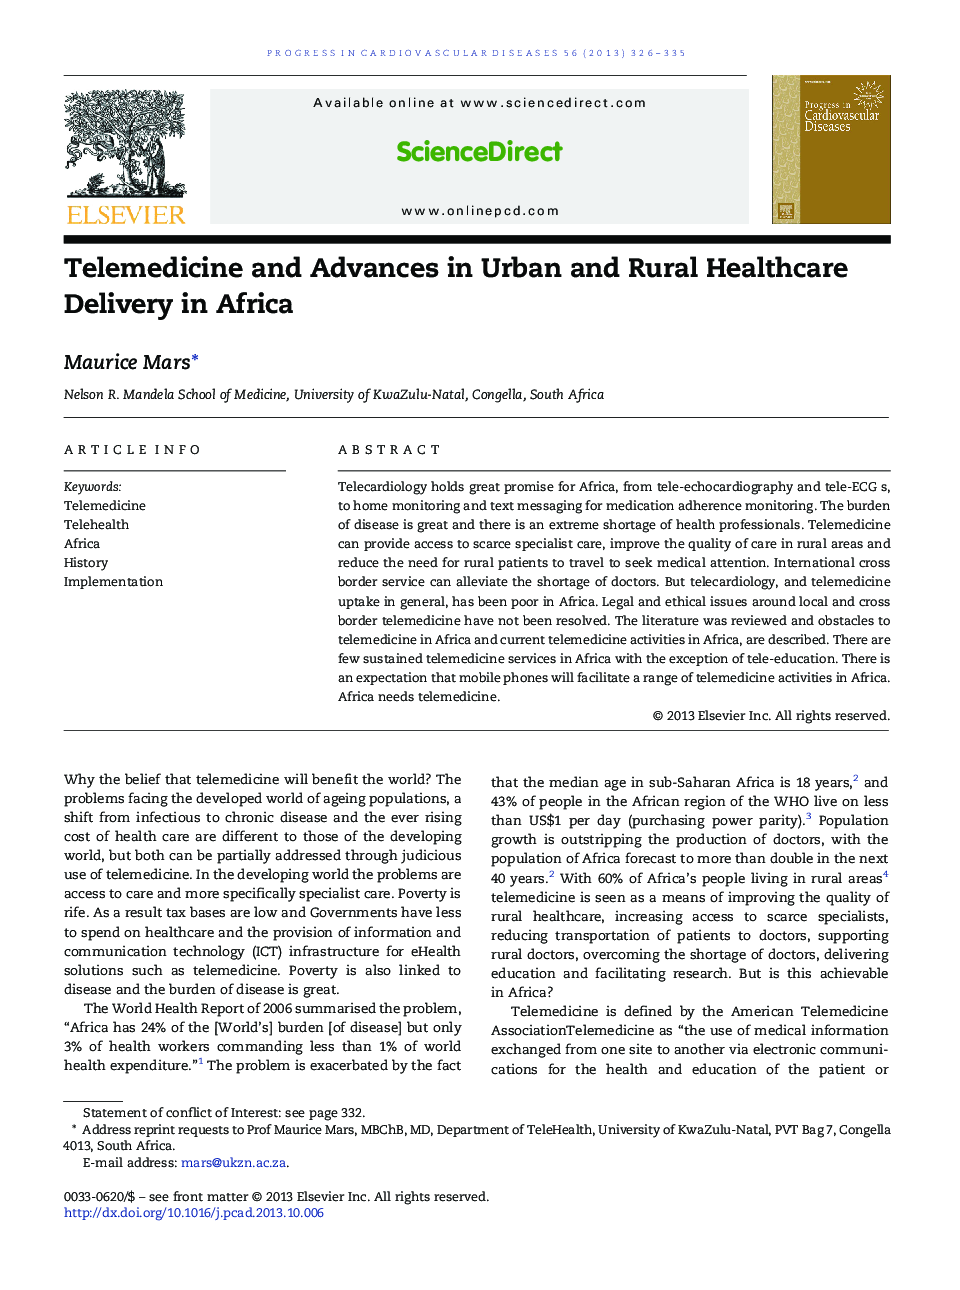 Telemedicine and Advances in Urban and Rural Healthcare Delivery in Africa 